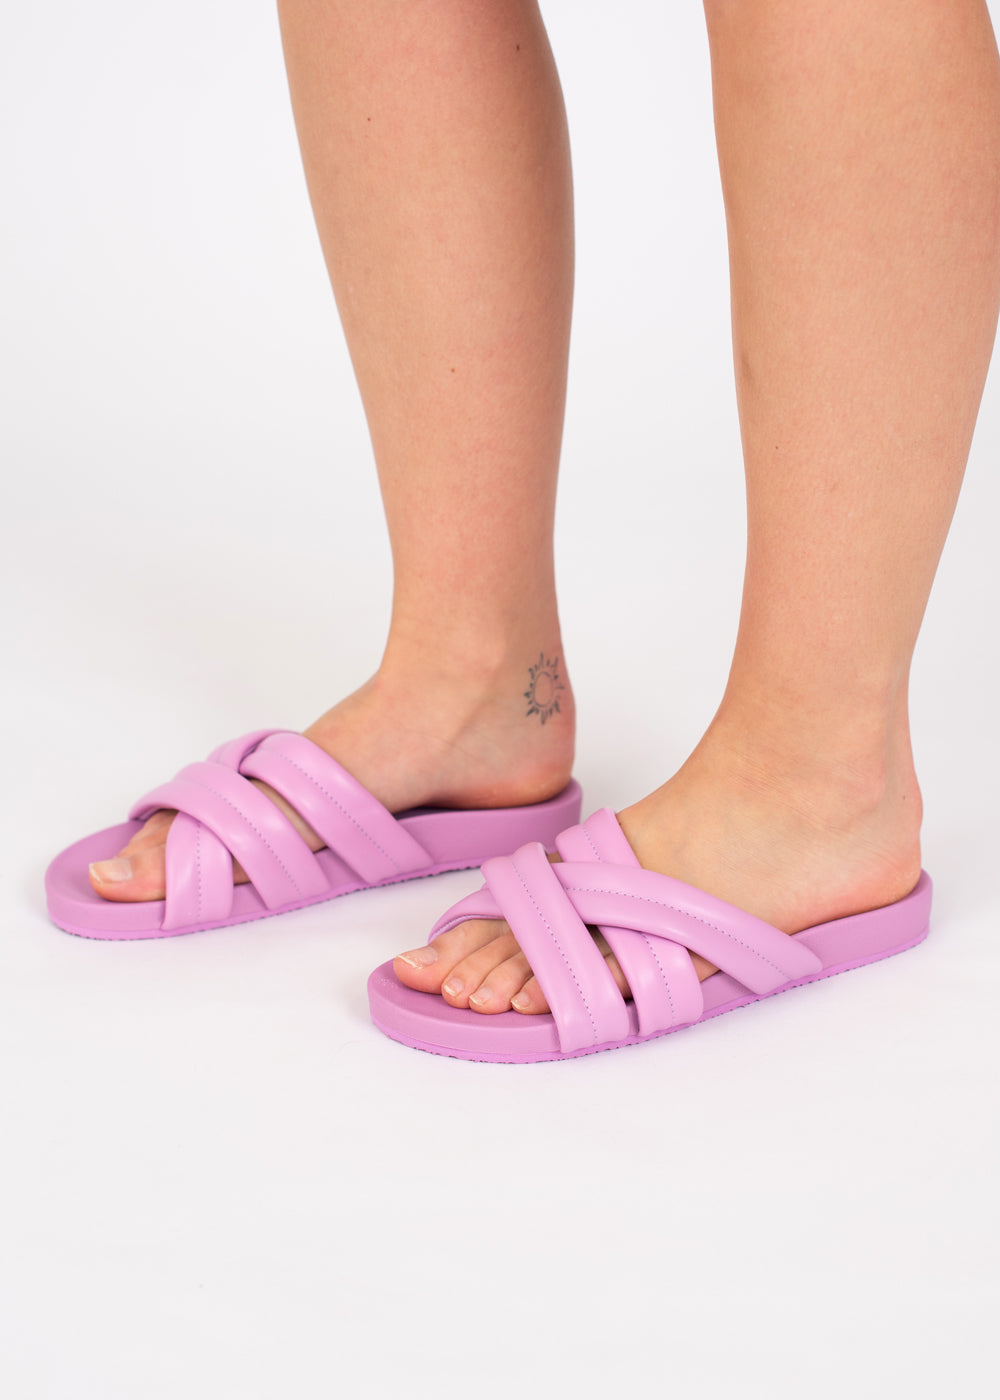 Load image into Gallery viewer, Serena Slider Sandals in Lilac by Billabong
